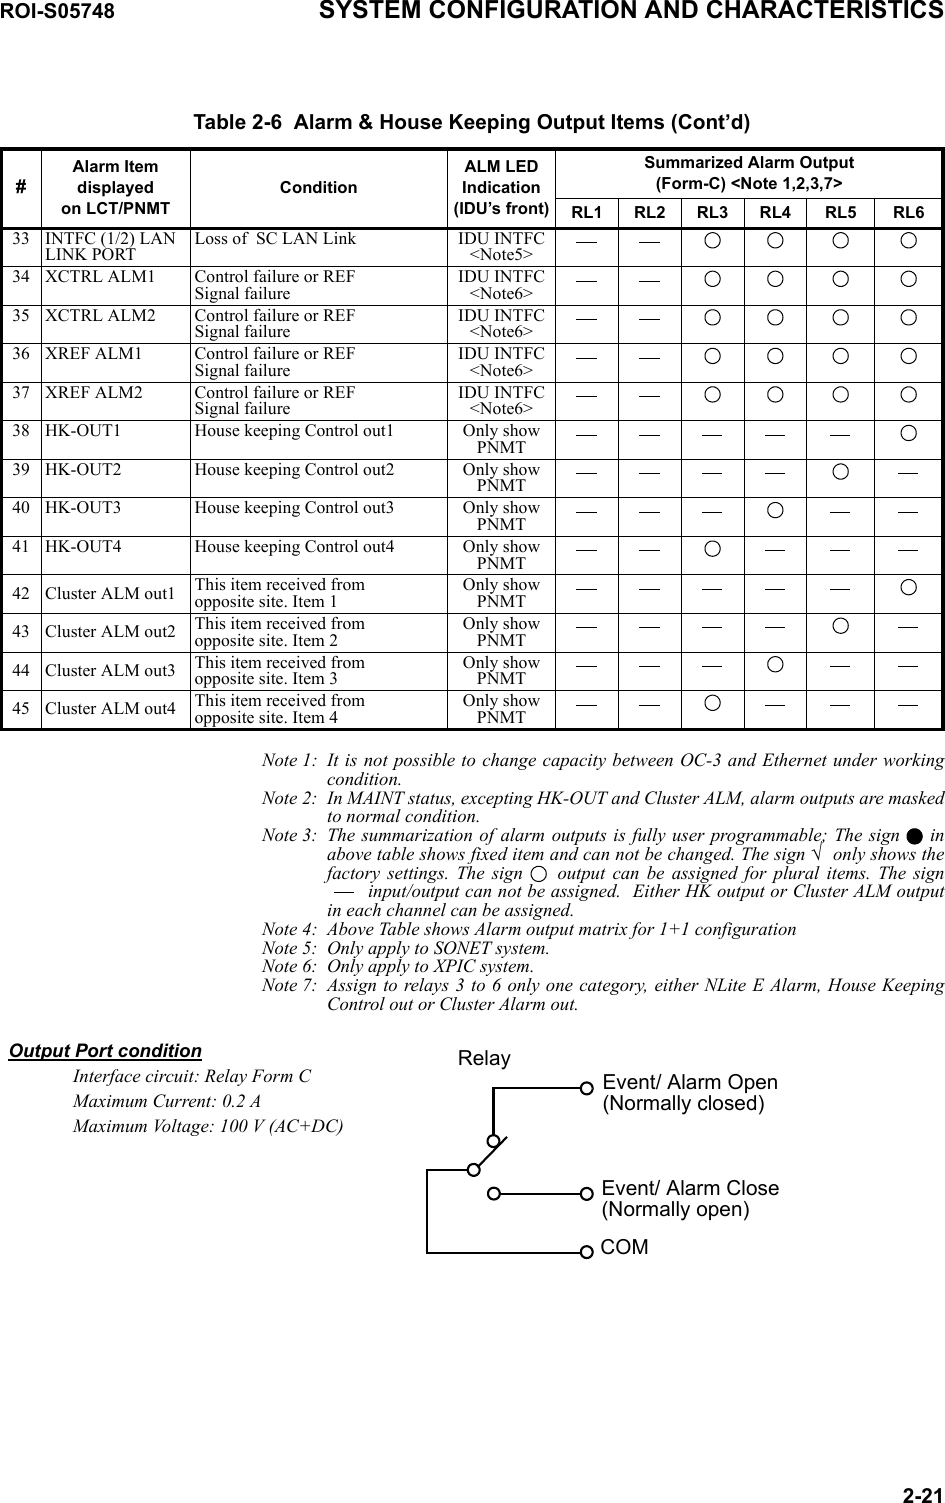 ROI-S05748 SYSTEM CONFIGURATION AND CHARACTERISTICS2-21Note 1: It is not possible to change capacity between OC-3 and Ethernet under working condition.Note 2: In MAINT status, excepting HK-OUT and Cluster ALM, alarm outputs are masked to normal condition.Note 3: The summarization of alarm outputs is fully user programmable; The sign   in above table shows fixed item and can not be changed. The sign √  only shows the factory settings. The sign   output can be assigned for plural items. The sign  input/output can not be assigned.  Either HK output or Cluster ALM output in each channel can be assigned.Note 4: Above Table shows Alarm output matrix for 1+1 configurationNote 5: Only apply to SONET system.Note 6: Only apply to XPIC system.Note 7: Assign to relays 3 to 6 only one category, either NLite E Alarm, House Keeping Control out or Cluster Alarm out.Output Port condition     Interface circuit: Relay Form CMaximum Current: 0.2 AMaximum Voltage: 100 V (AC+DC)Event/ Alarm Open (Normally closed)Event/ Alarm Close (Normally open)COMRelay 33 INTFC (1/2) LAN LINK PORTLoss of  SC LAN Link IDU INTFC&lt;Note5&gt;34 XCTRL ALM1 Control failure or REFSignal failureIDU INTFC&lt;Note6&gt;35 XCTRL ALM2 Control failure or REFSignal failureIDU INTFC&lt;Note6&gt;36 XREF ALM1 Control failure or REFSignal failureIDU INTFC&lt;Note6&gt;37 XREF ALM2 Control failure or REFSignal failureIDU INTFC&lt;Note6&gt;38 HK-OUT1 House keeping Control out1 Only showPNMT39 HK-OUT2 House keeping Control out2 Only showPNMT40 HK-OUT3 House keeping Control out3 Only showPNMT41 HK-OUT4 House keeping Control out4 Only showPNMT42 Cluster ALM out1 This item received fromopposite site. Item 1Only showPNMT43 Cluster ALM out2 This item received fromopposite site. Item 2Only showPNMT44 Cluster ALM out3 This item received fromopposite site. Item 3Only showPNMT45 Cluster ALM out4 This item received fromopposite site. Item 4Only showPNMTTable 2-6  Alarm &amp; House Keeping Output Items (Cont’d)#Alarm Itemdisplayedon LCT/PNMTConditionALM LED Indication  (IDU’s front)Summarized Alarm Output(Form-C) &lt;Note 1,2,3,7&gt;RL1 RL2 RL3 RL4 RL5 RL6